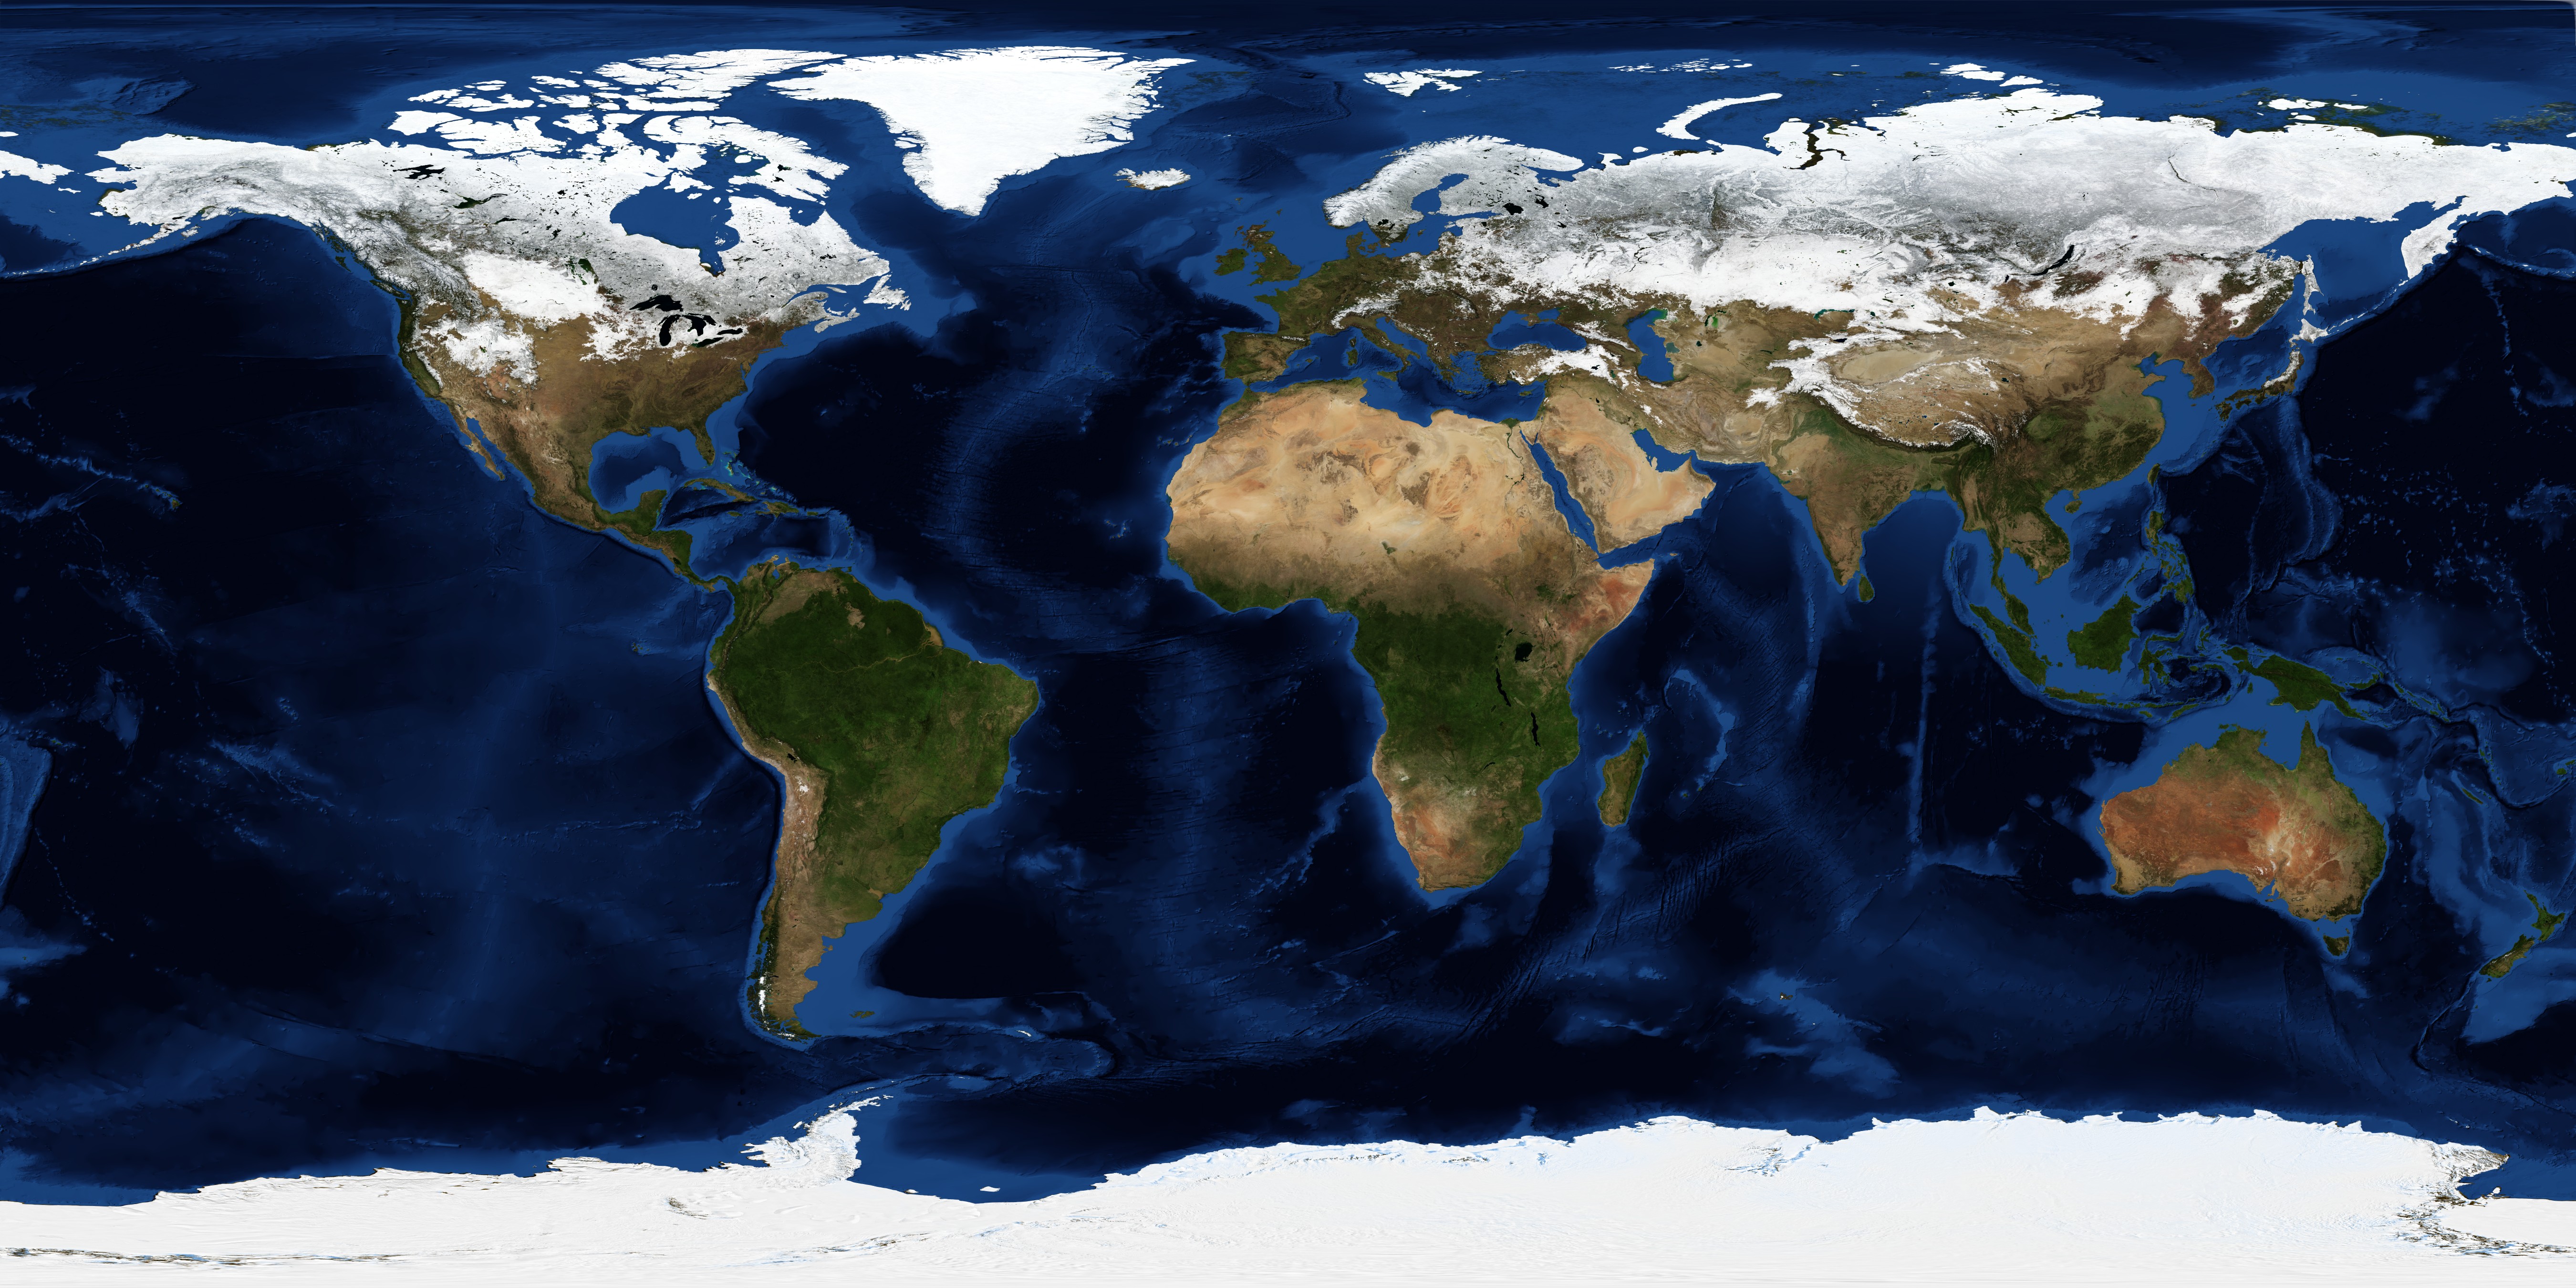 February, Blue Marble Next Generation w/ Topography and Bathymetry - related image preview